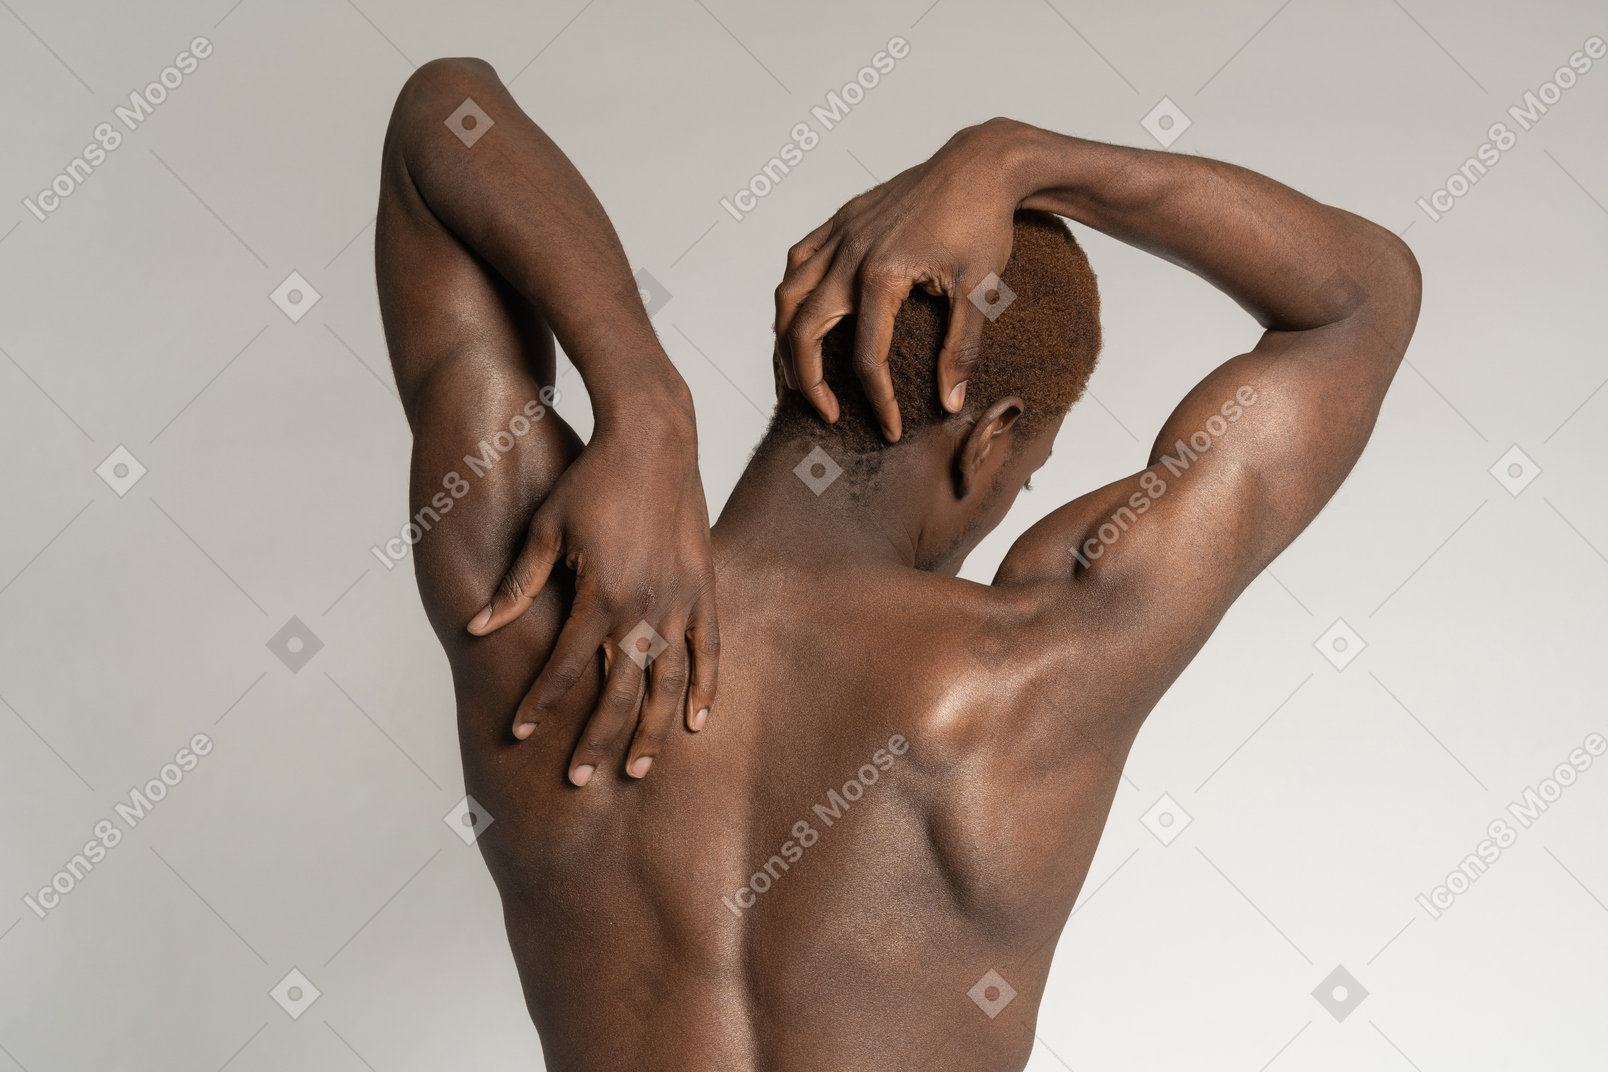 Man stretching and touching back and head